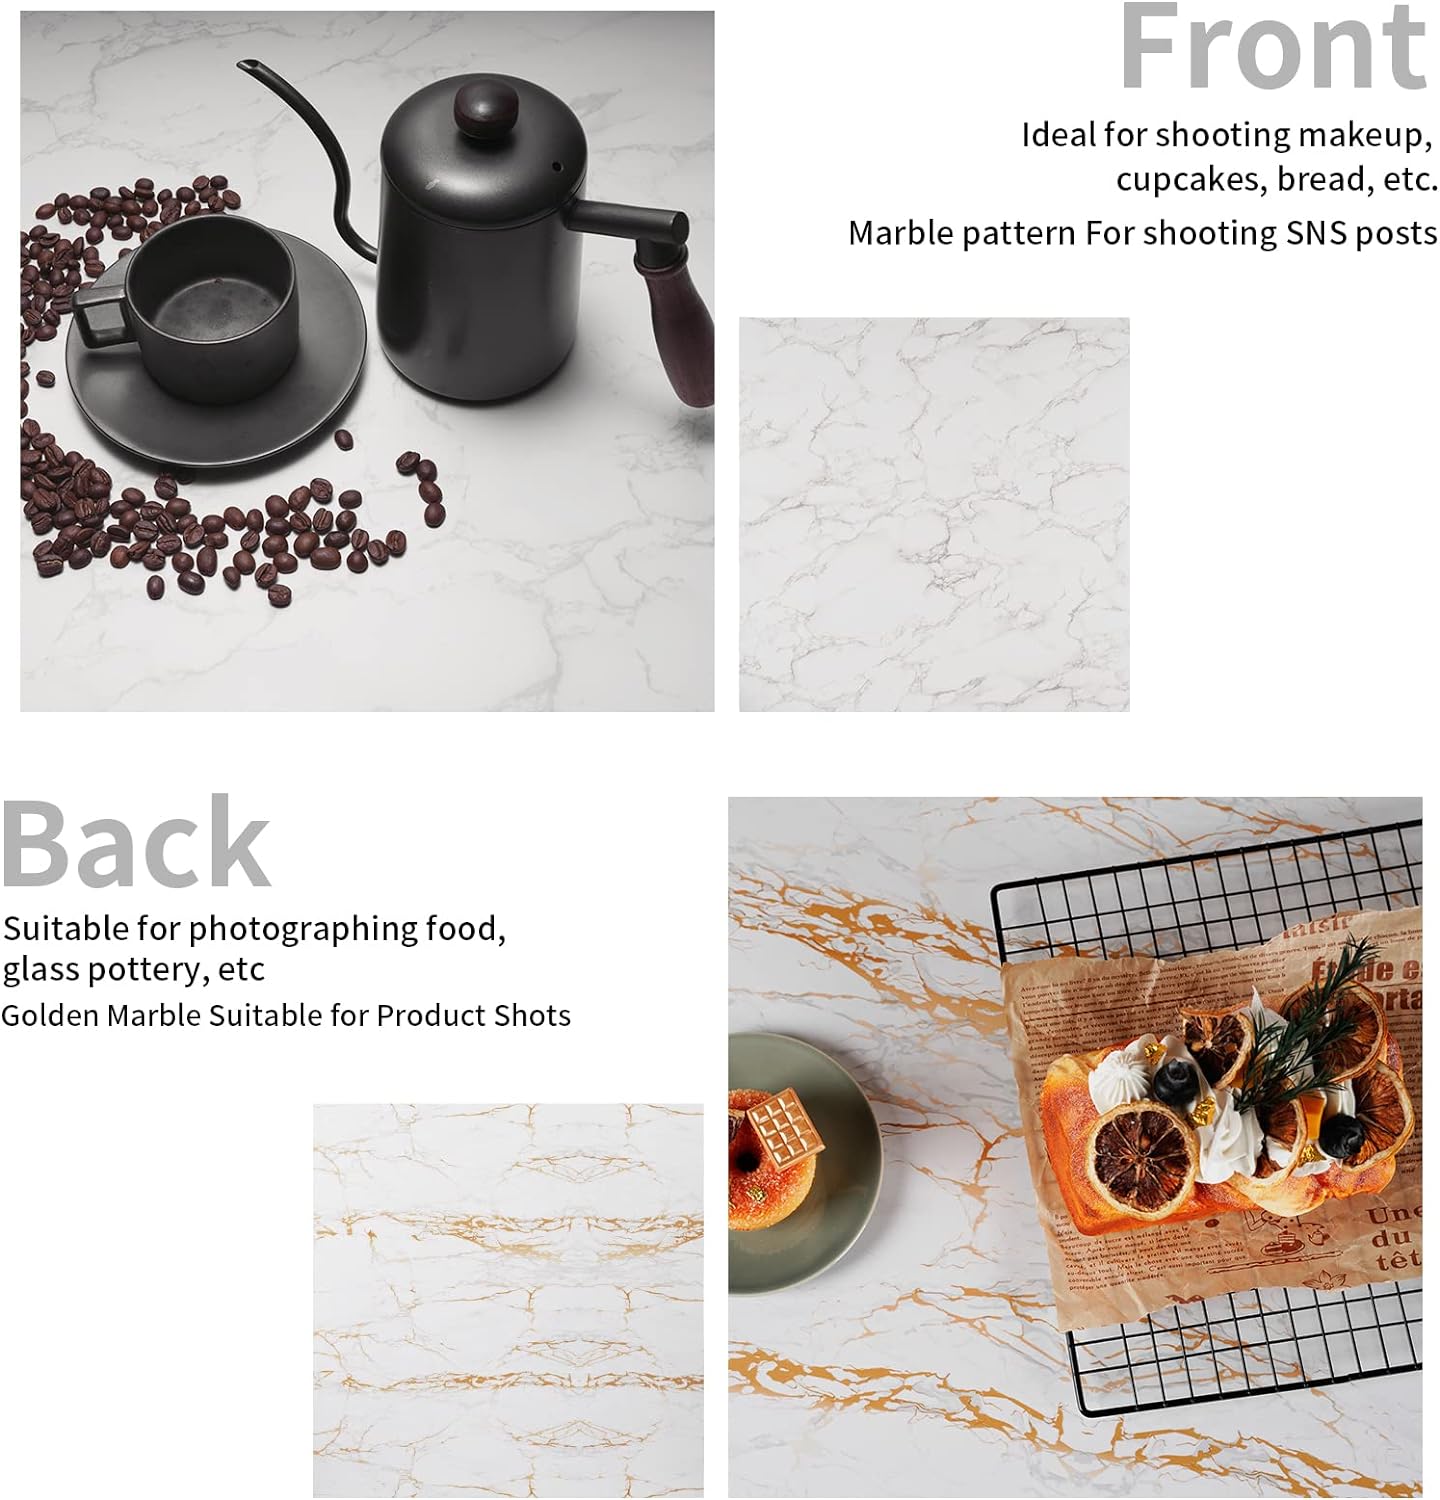 2 Pcs 1.8 Ft/55cm Photo Backdrop Boards, 2 in 1 Marble & Wood Texture Realistic Surface Background for Flat Lay Food, Tabletop Product Photography - 4 Patterns